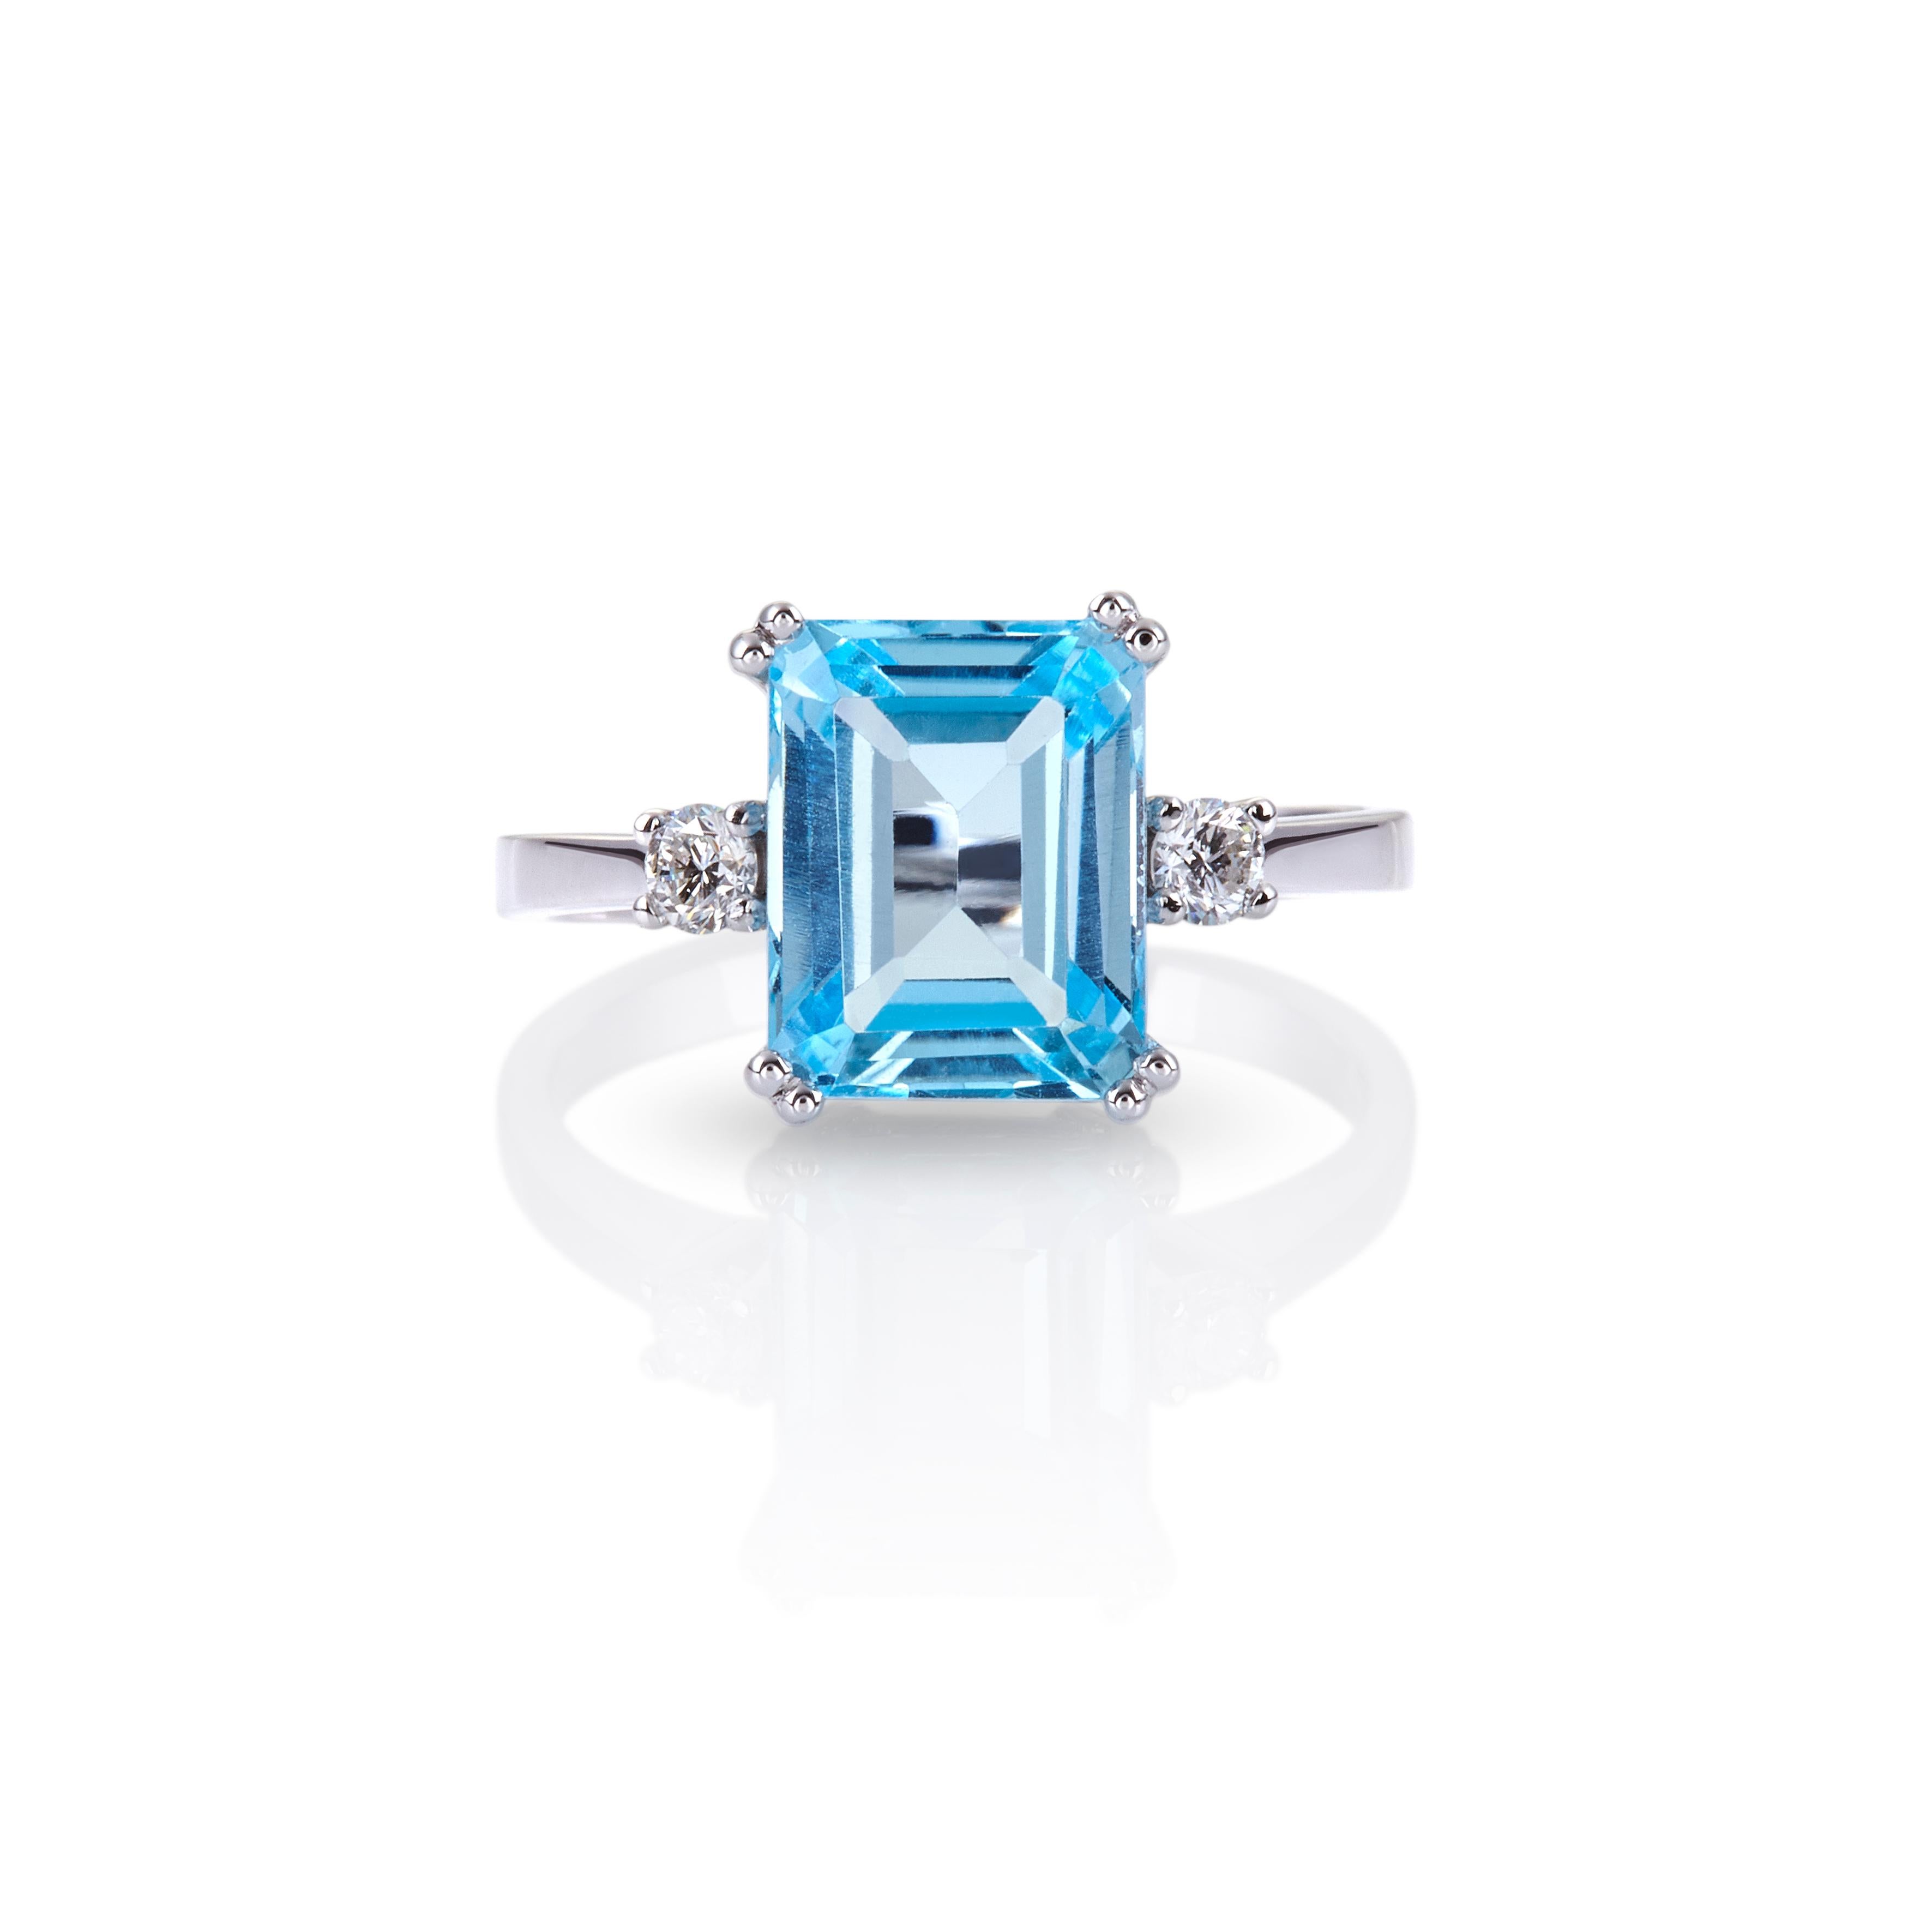 For Sale:  Double Prong Ring in 18Kt White Gold with Emerald Cut Blue Topaz and Diamonds 2